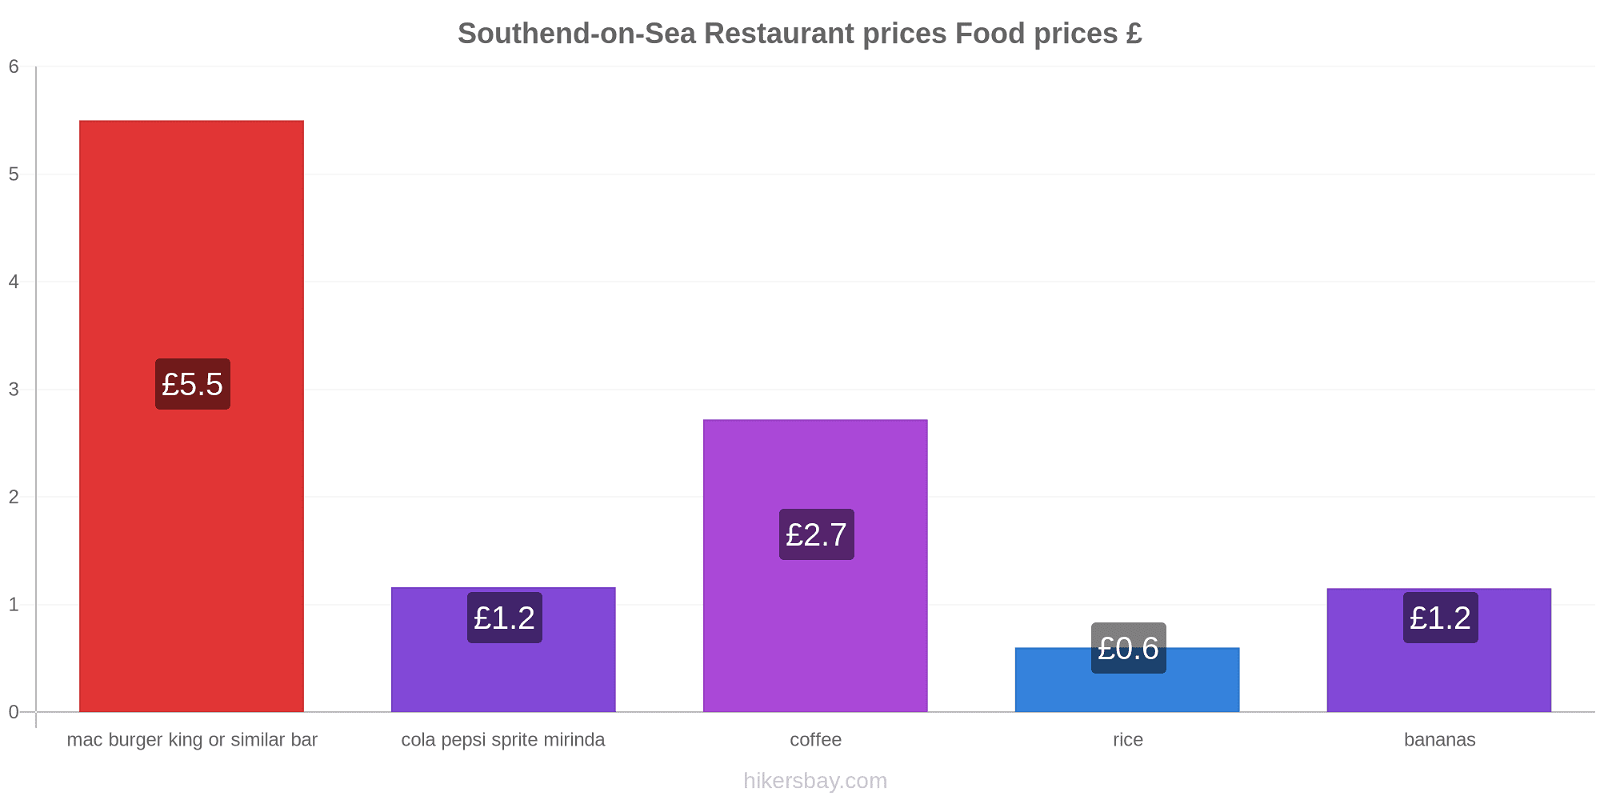 Southend-on-Sea price changes hikersbay.com